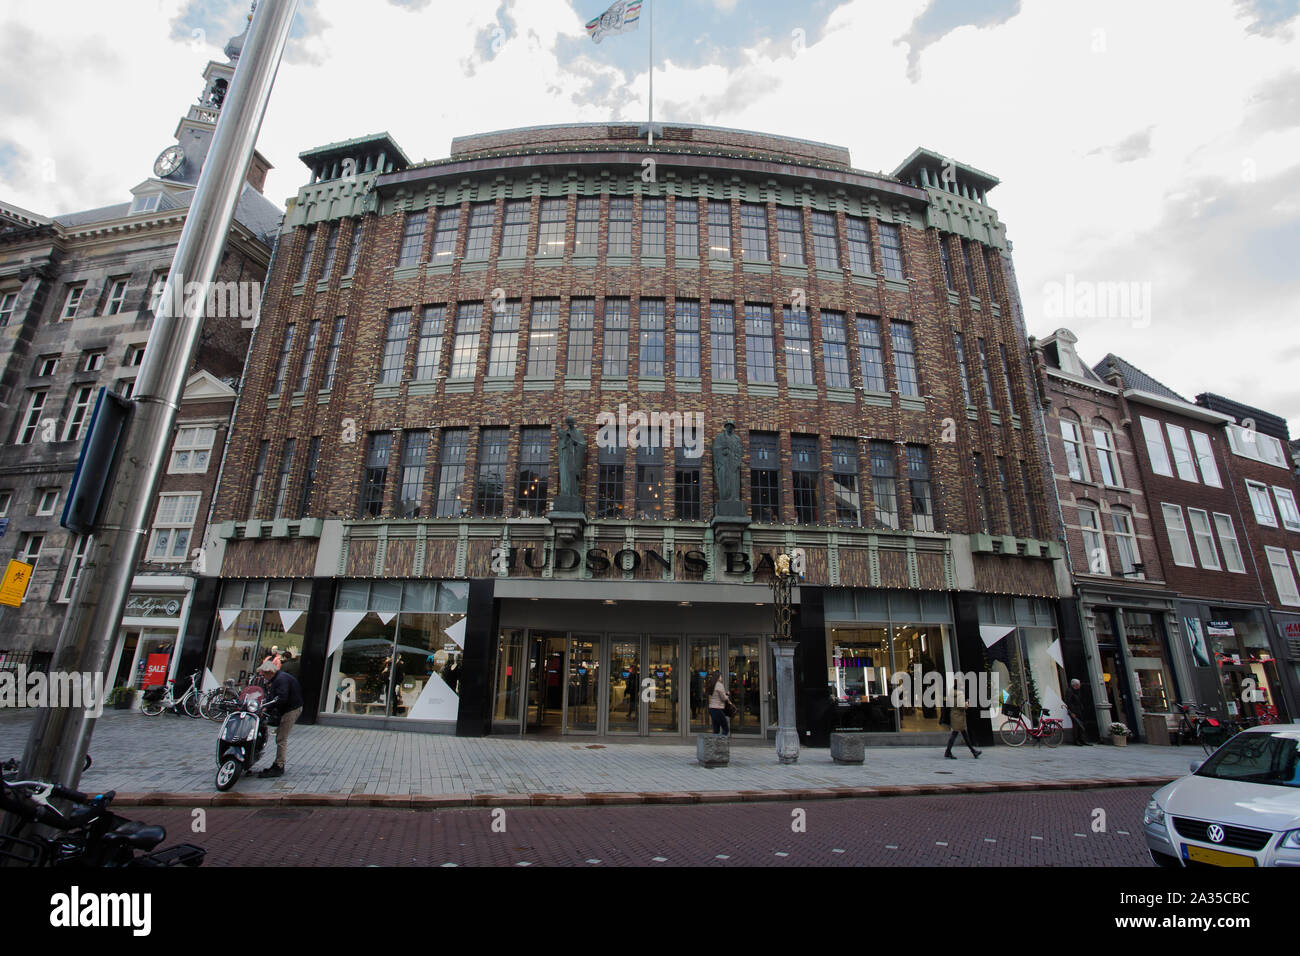 Netherlands s'Hertogenbosch, December 11, 2018 Hudson's Bay. The Hudson's Bay Company is a Canadian retail business group. Stock Photo